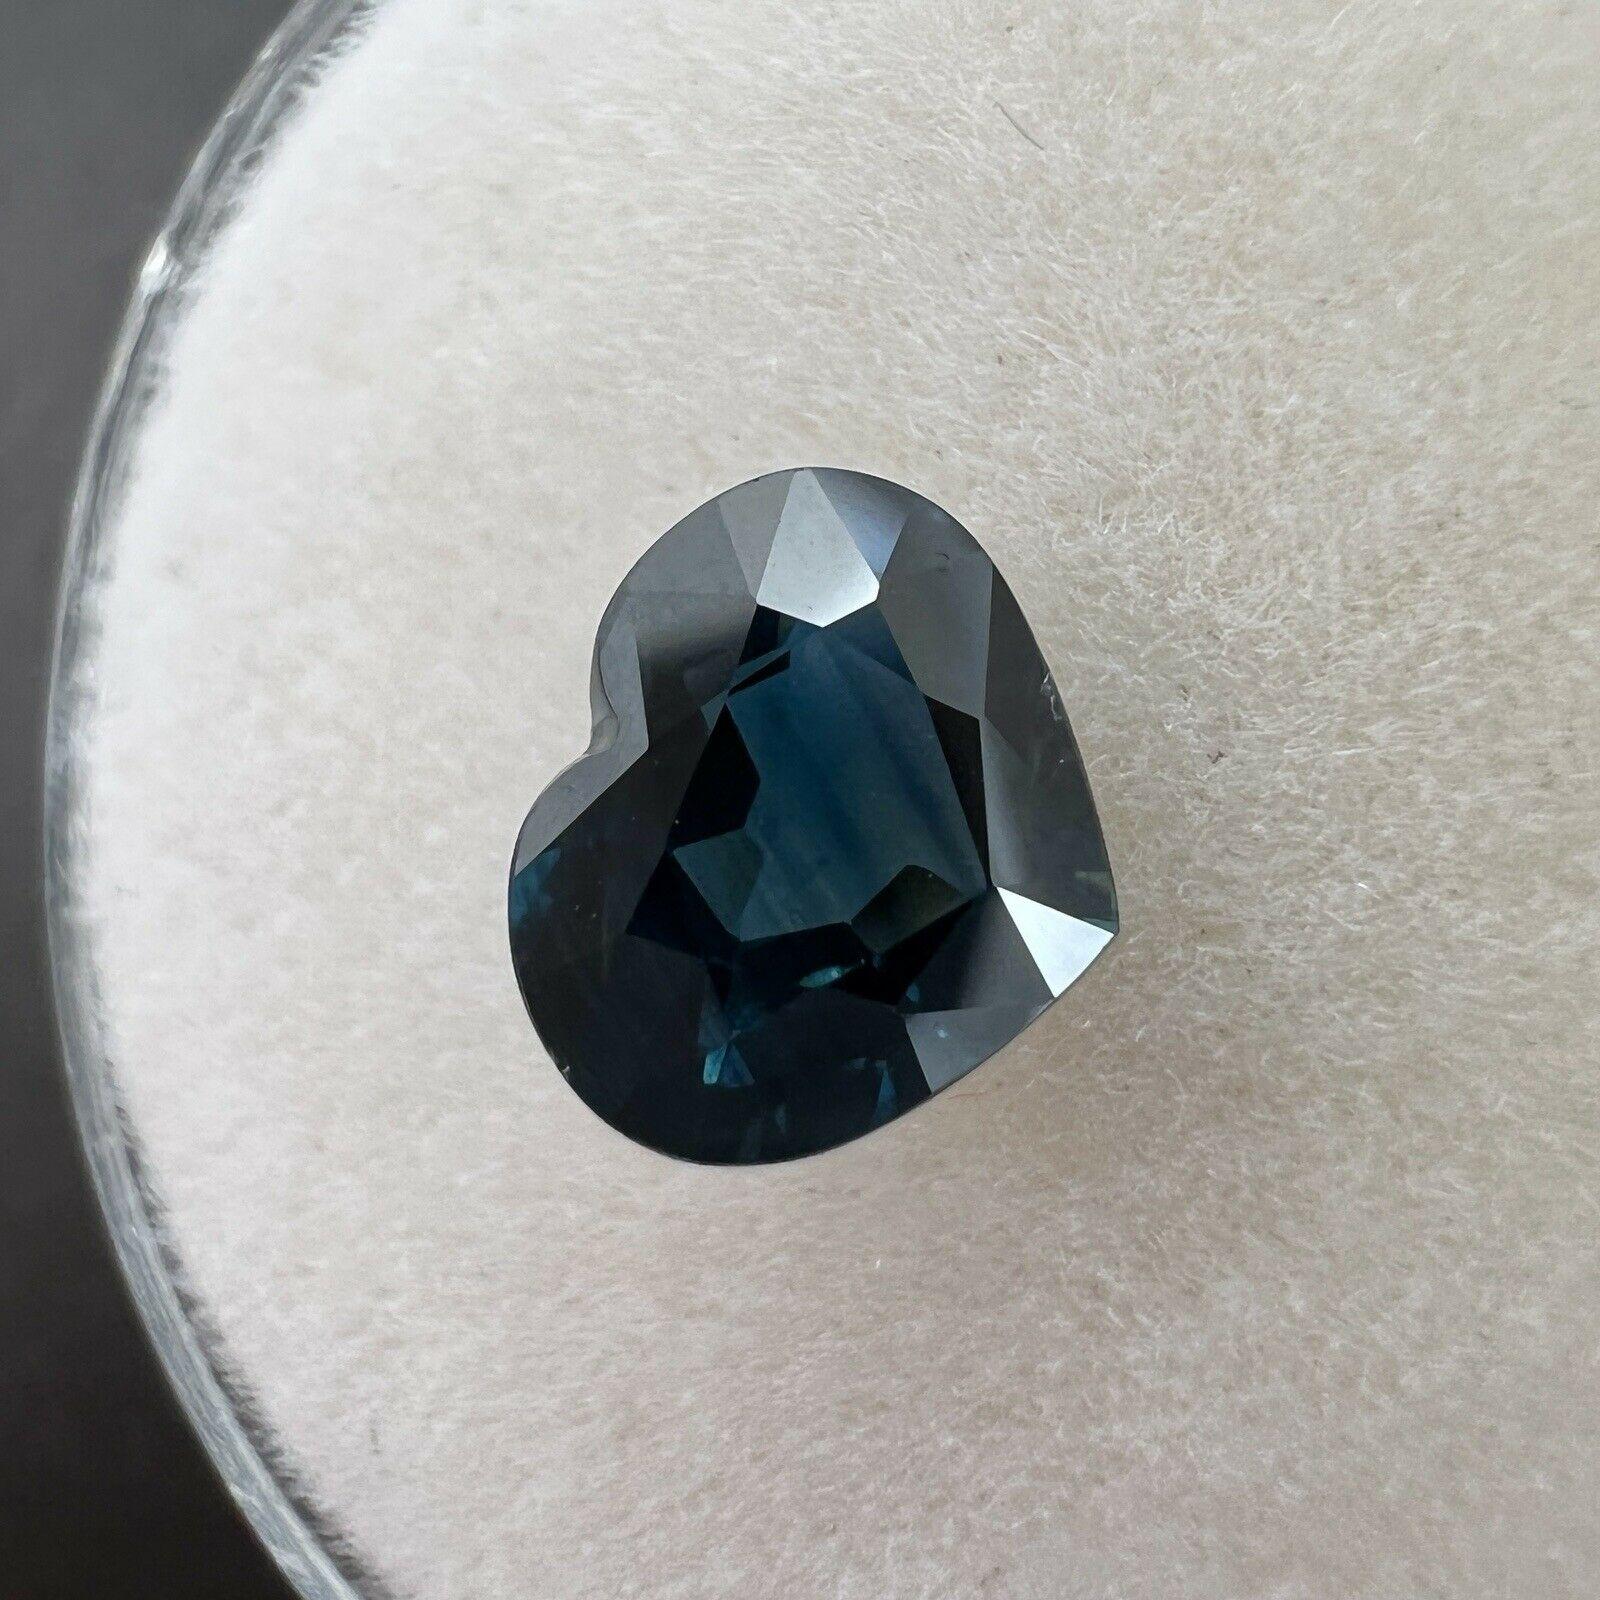 Women's or Men's GRA Certified 1.17ct Blue Sapphire Untreated Heart Cut Loose Rare Gem For Sale